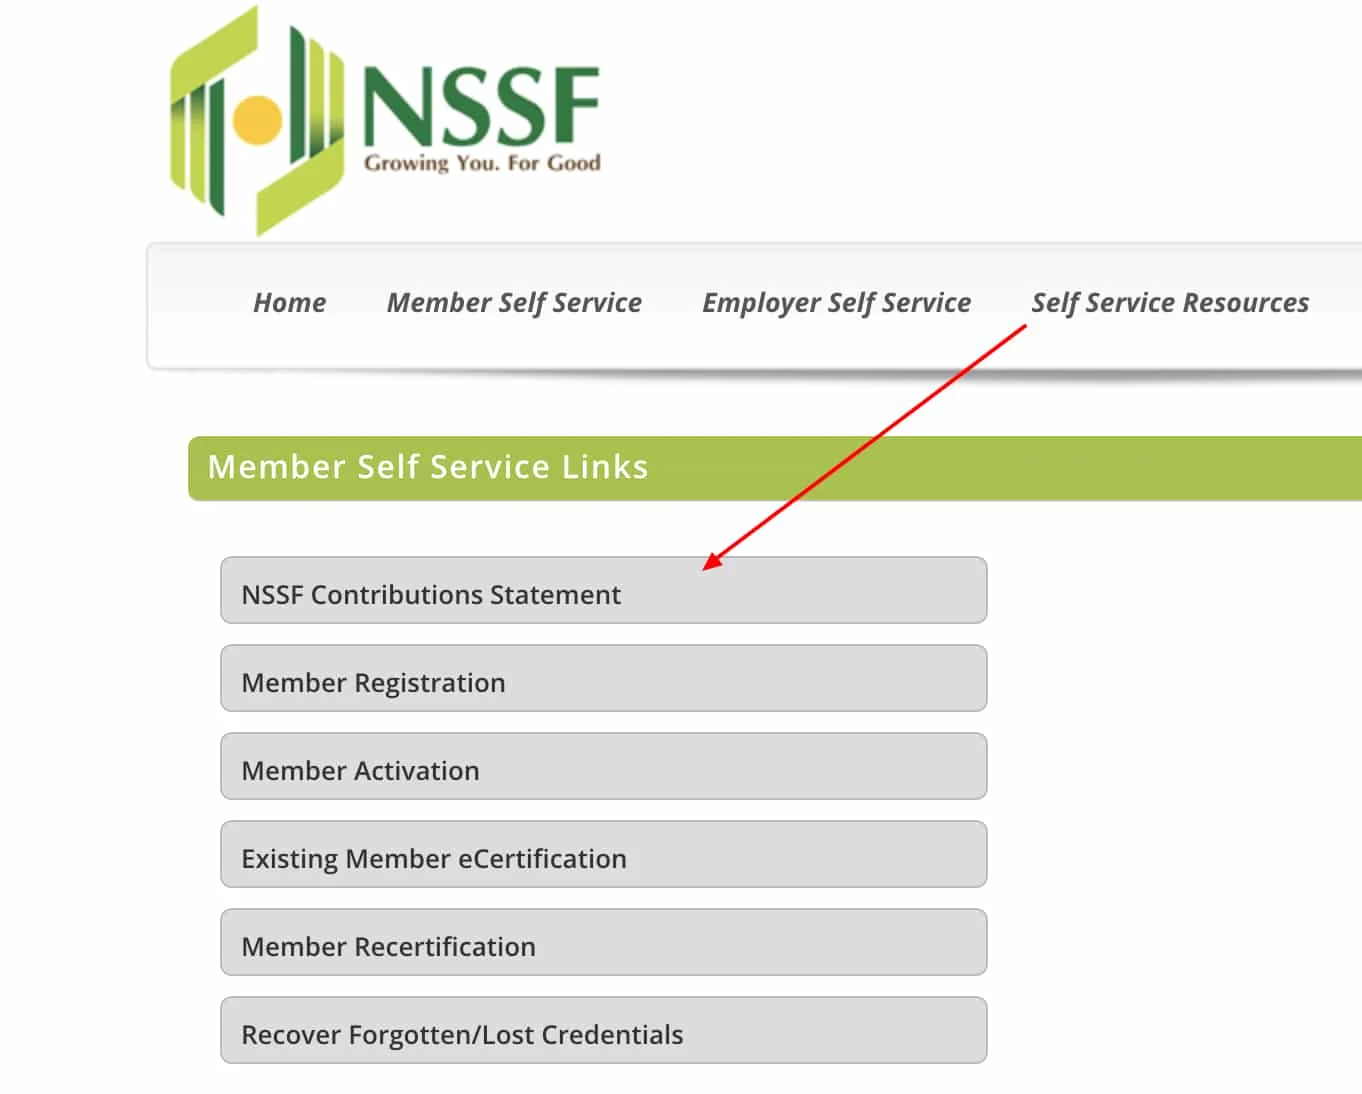 How to Get and Check NSSF Statement Online in Kenya